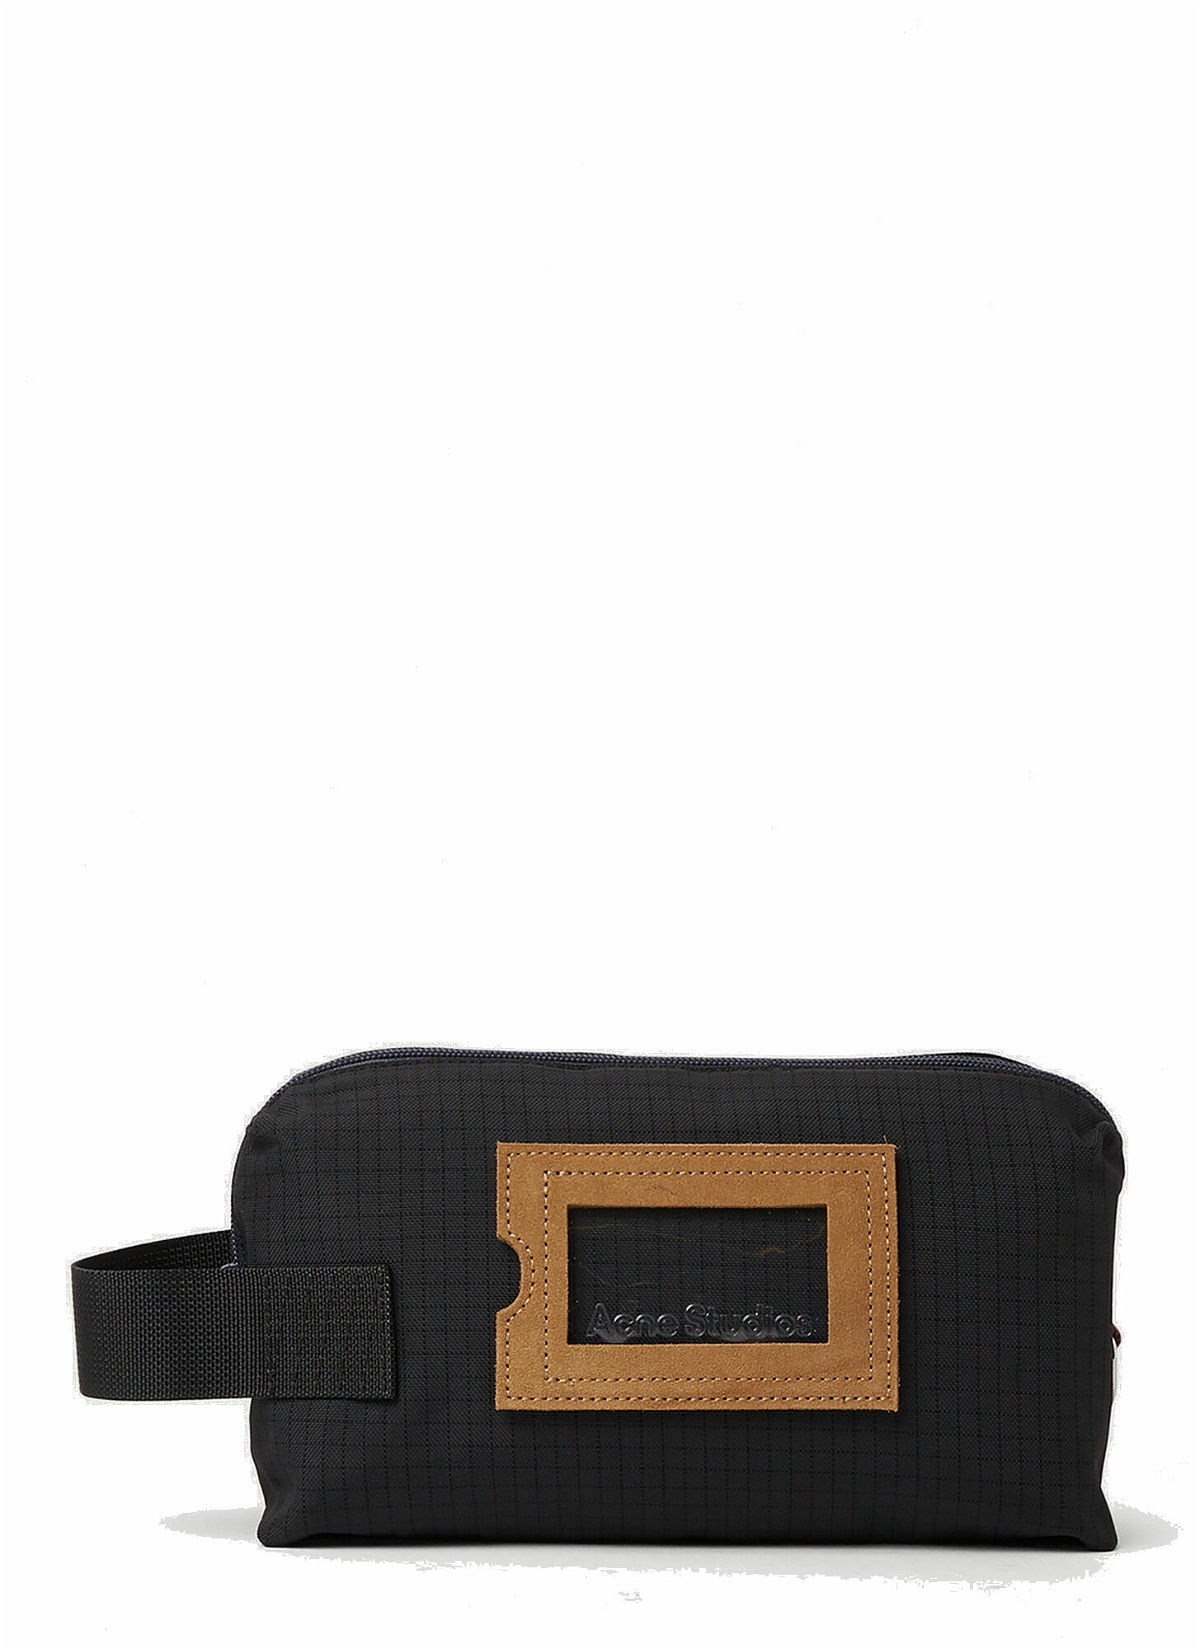 Photo: Pouch Bag in Black